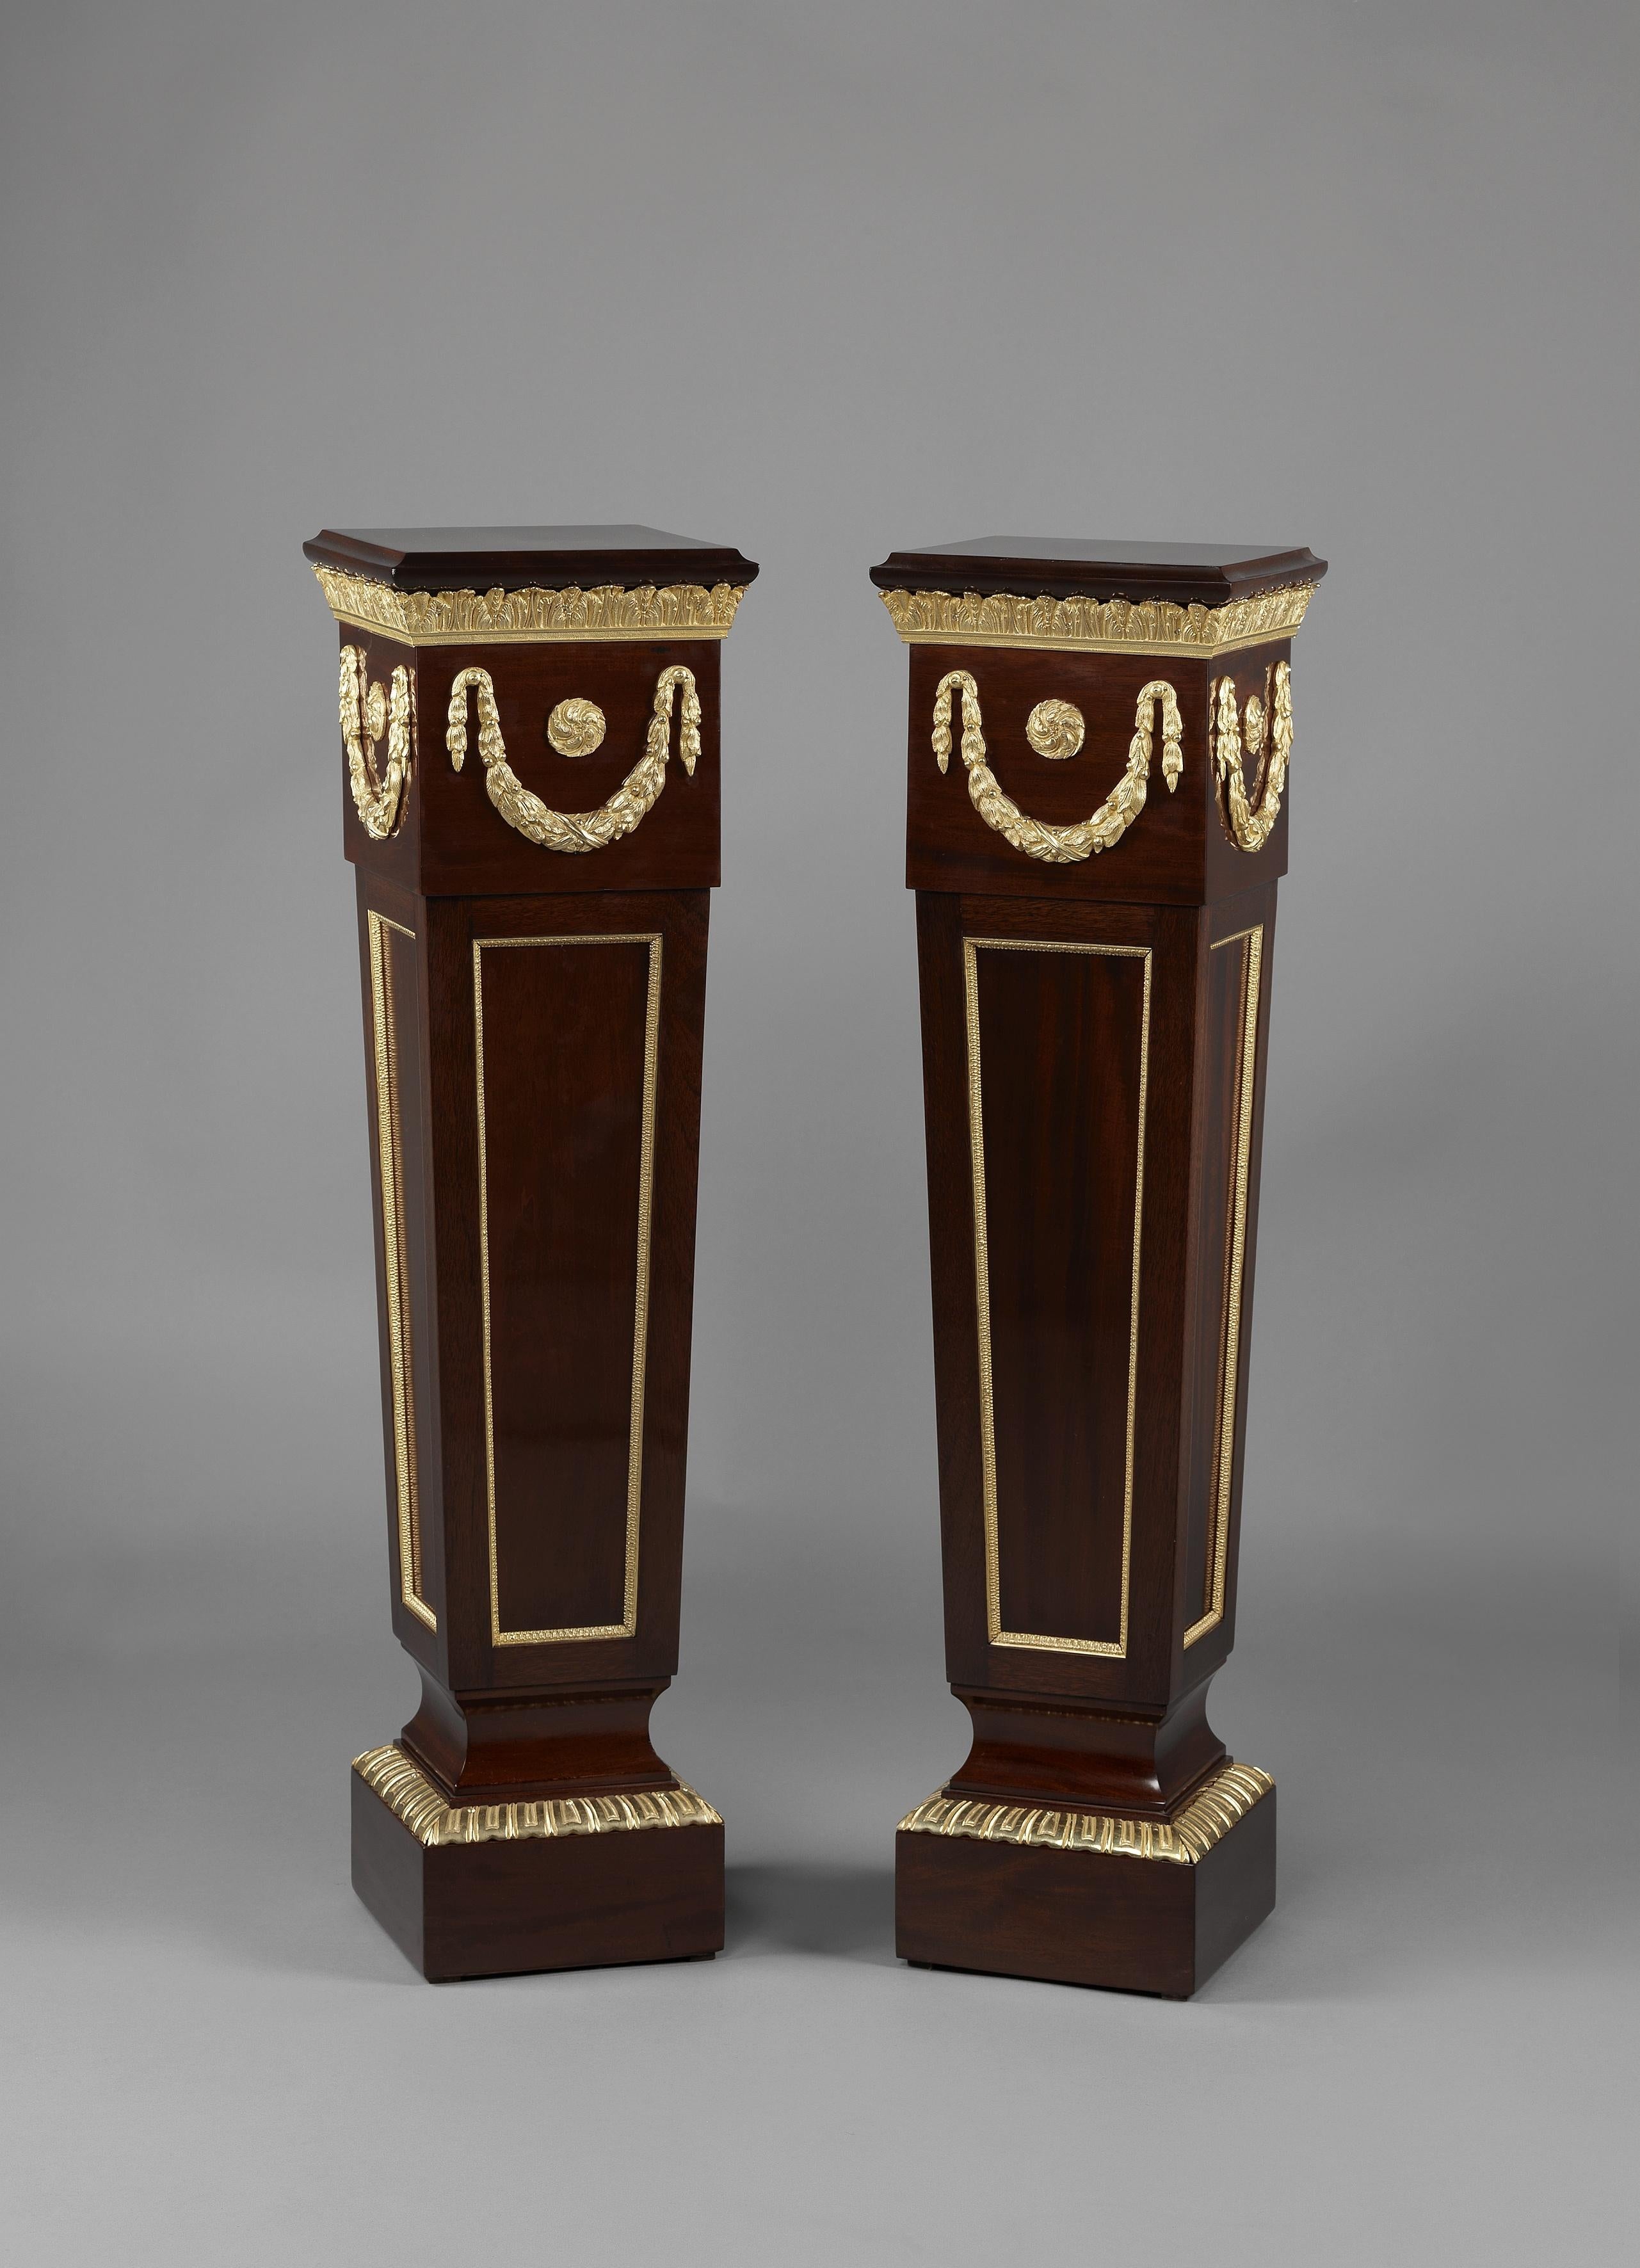 A pair of Louis XVI style gilt-bronze mounted mahogany pedestals. 

French, circa 1900. 

Each pedestal is of tapering square section with gilt bronze garlands and acanthus bands.